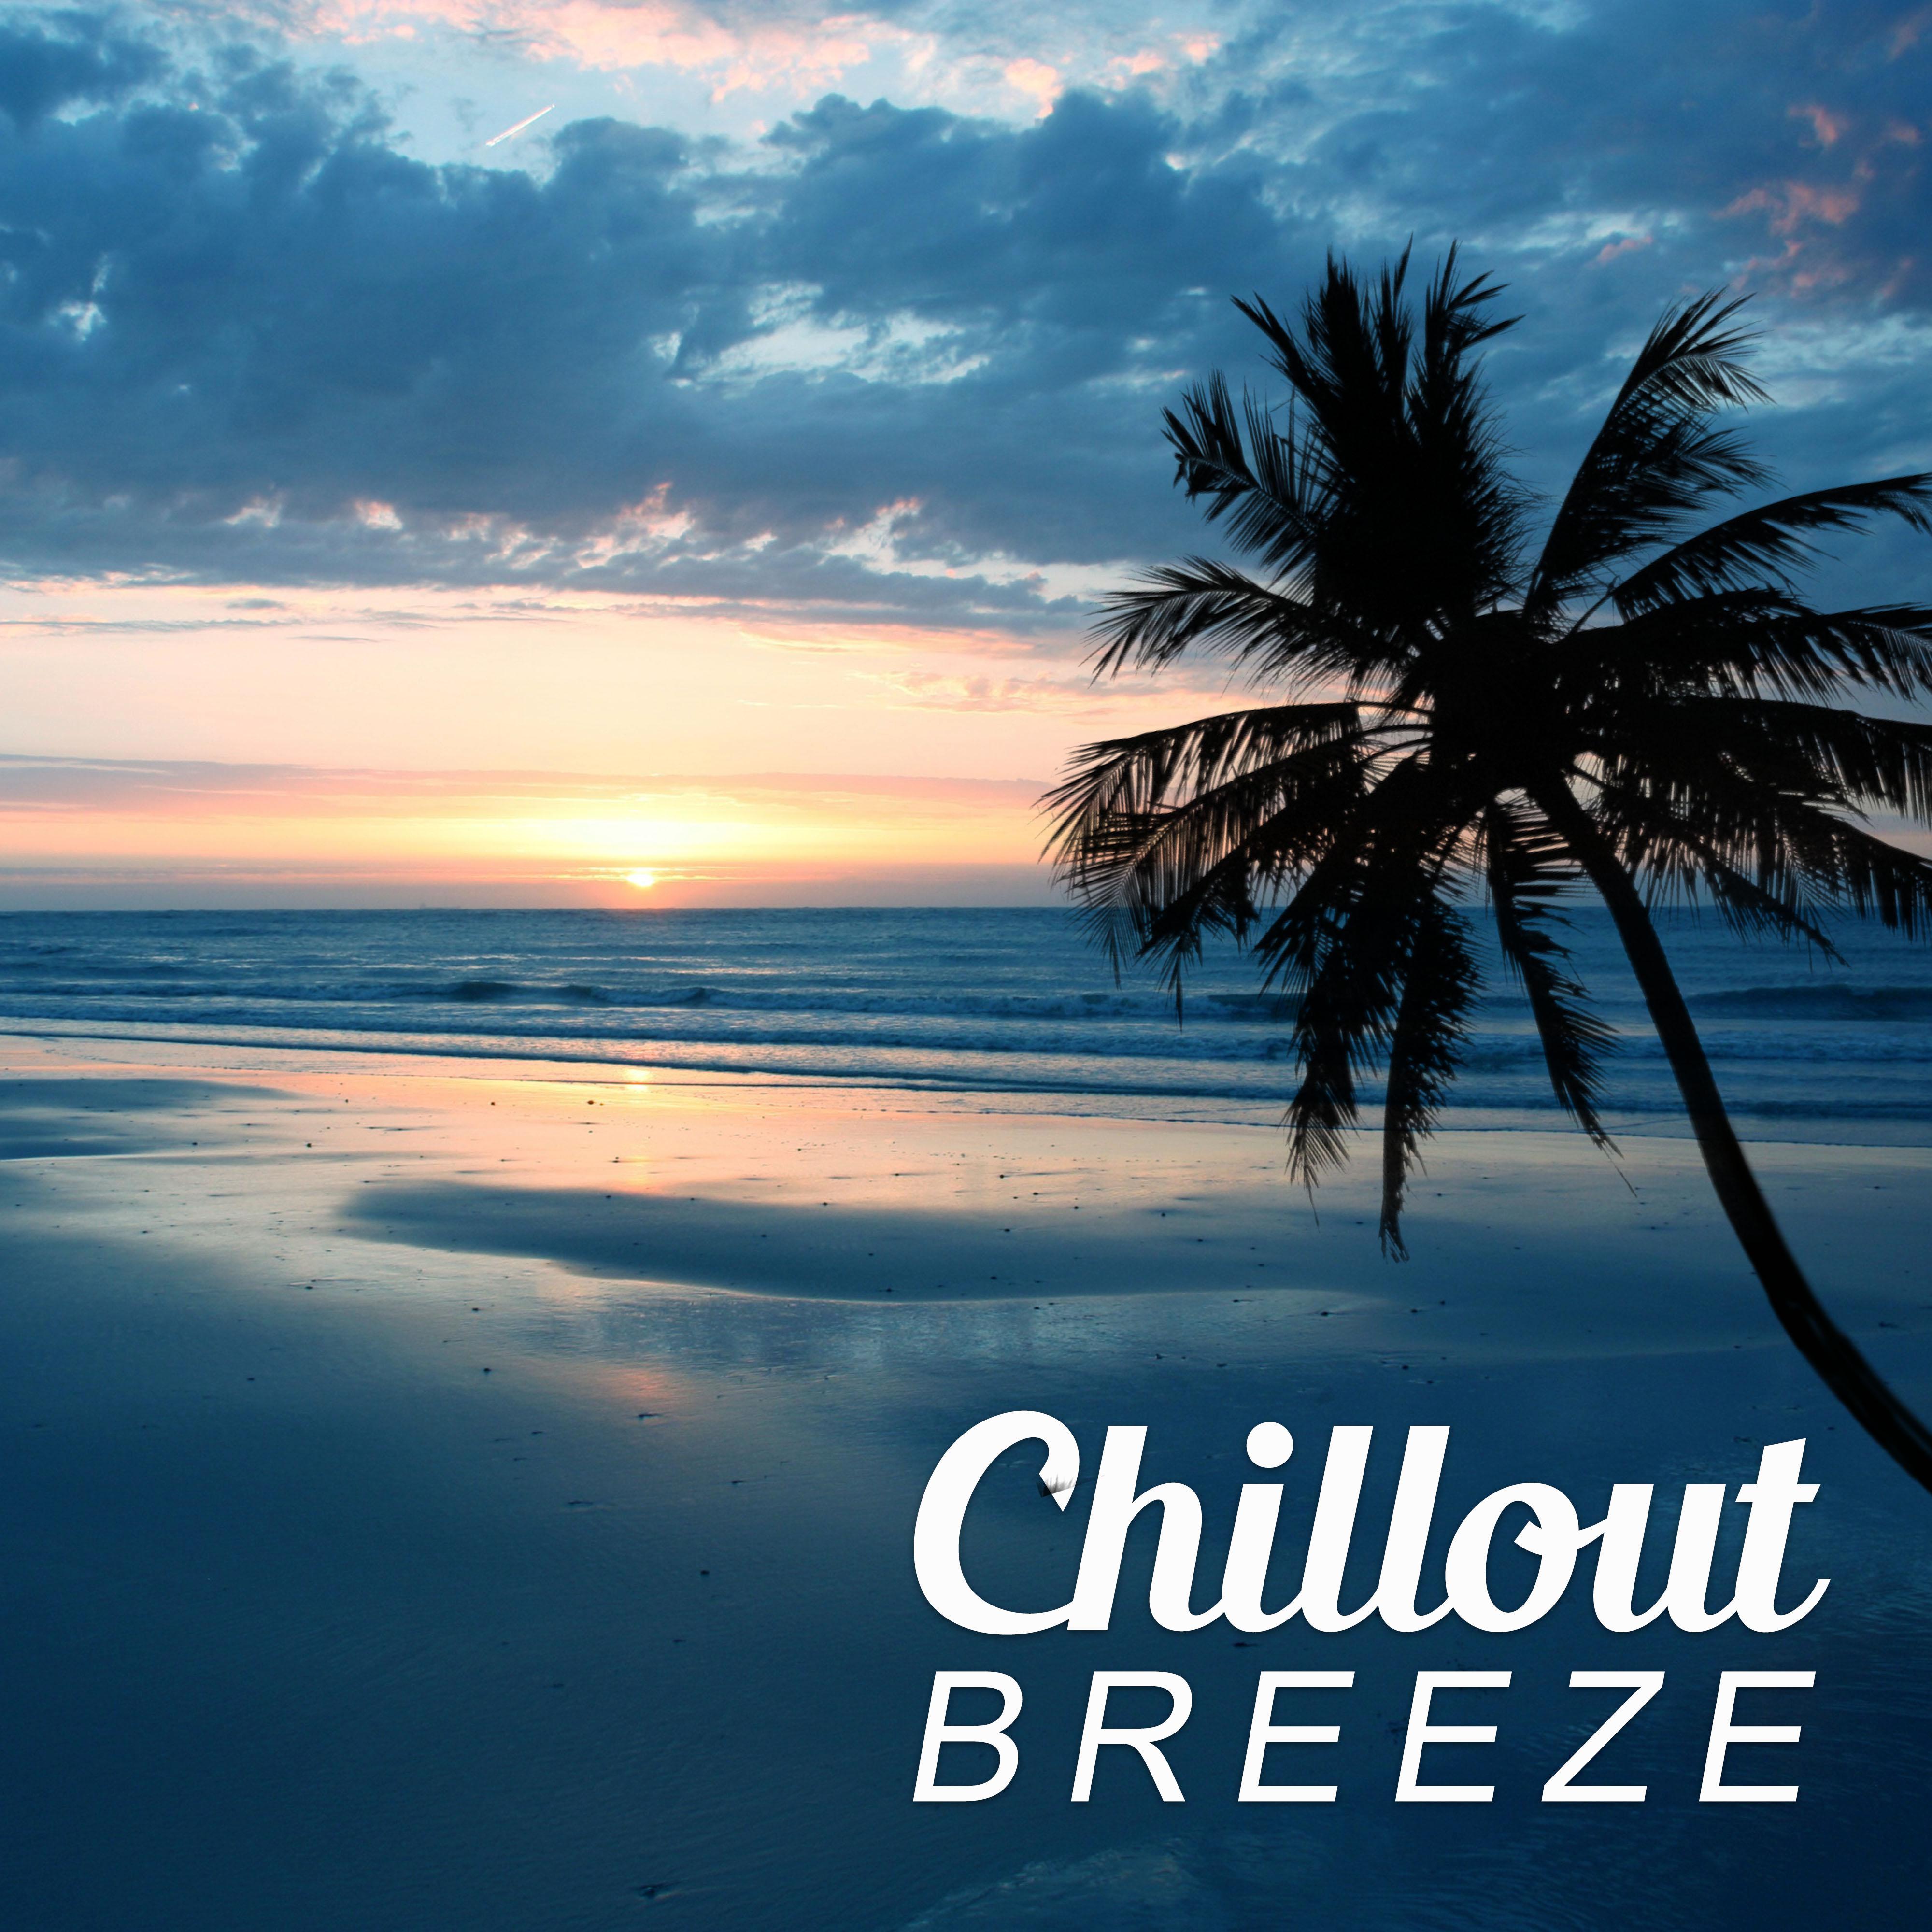 Chillout Breeze – Chill Out Music, Happy Chill Out, Touch the Sky, Relax Yourself, Beach Sunrise